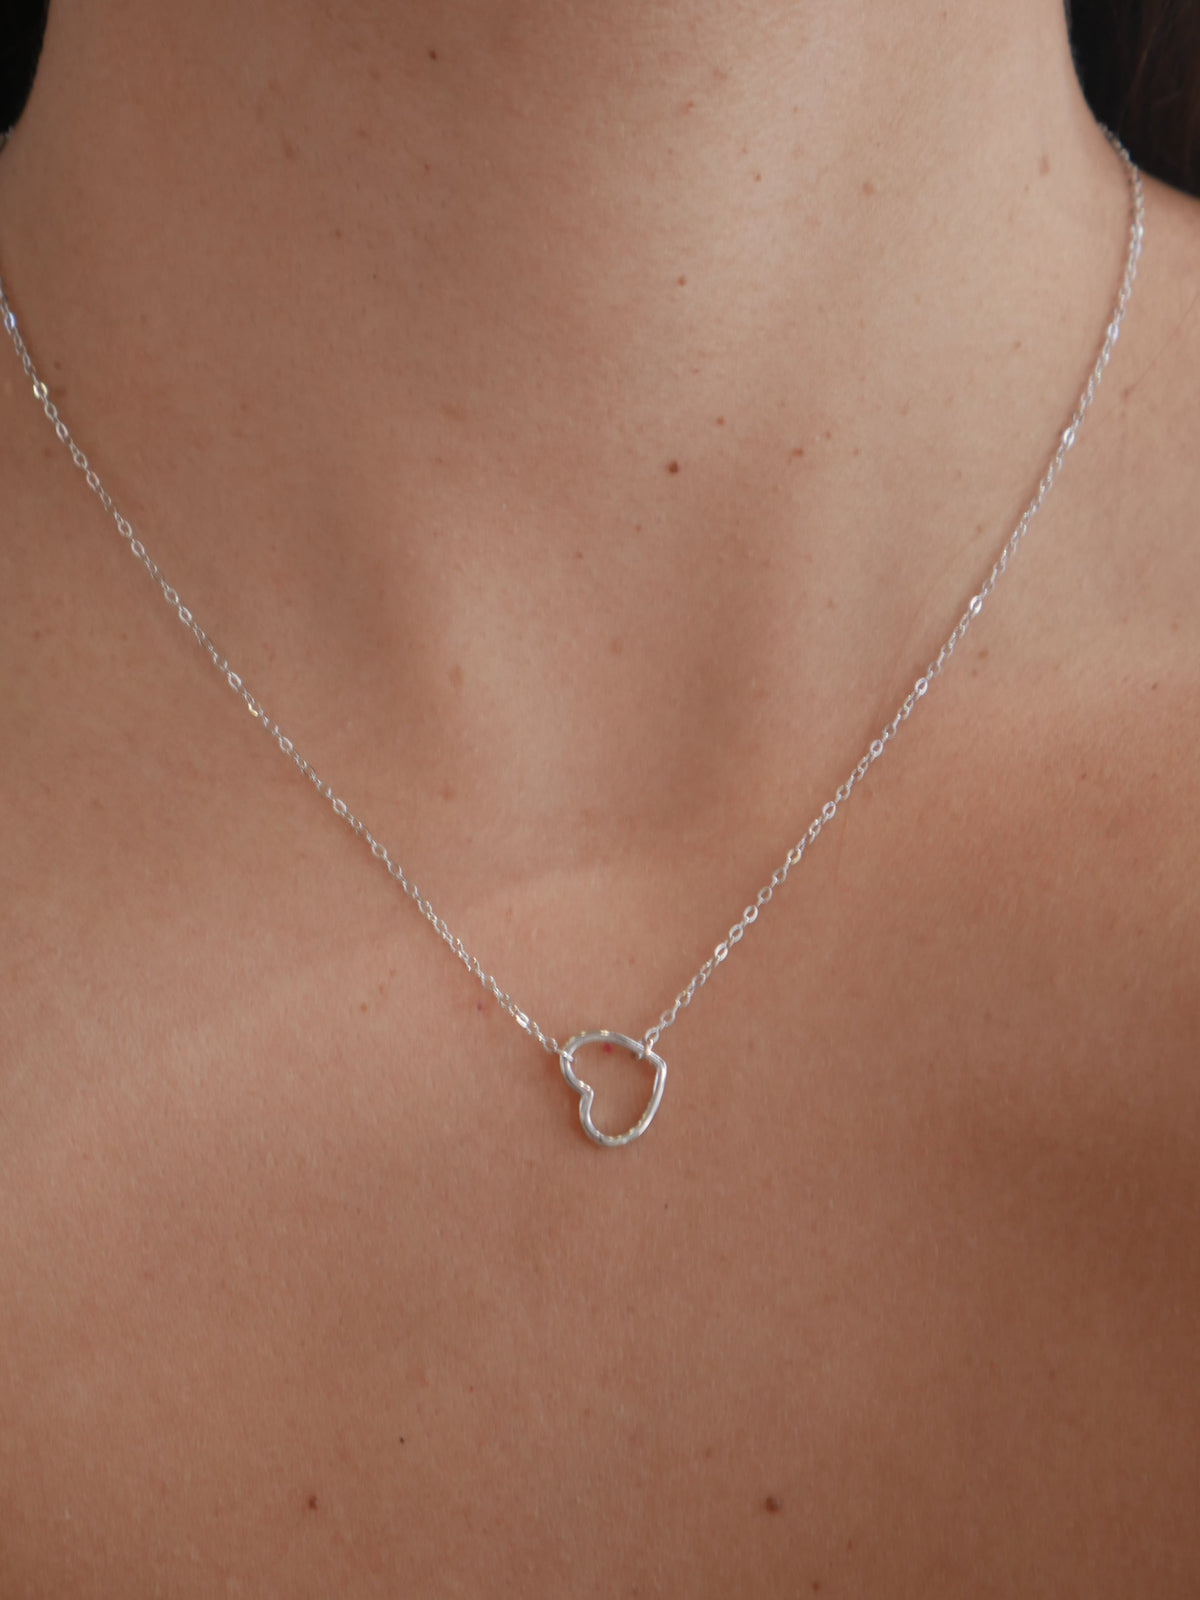 necklaces, silver, heart plain dainty necklace, sterling silver waterproof heart necklaces, hypoallergenic, dainty necklaces, popular, unique, designer inspired, influencer necklaces, trending on instagram and tiktok